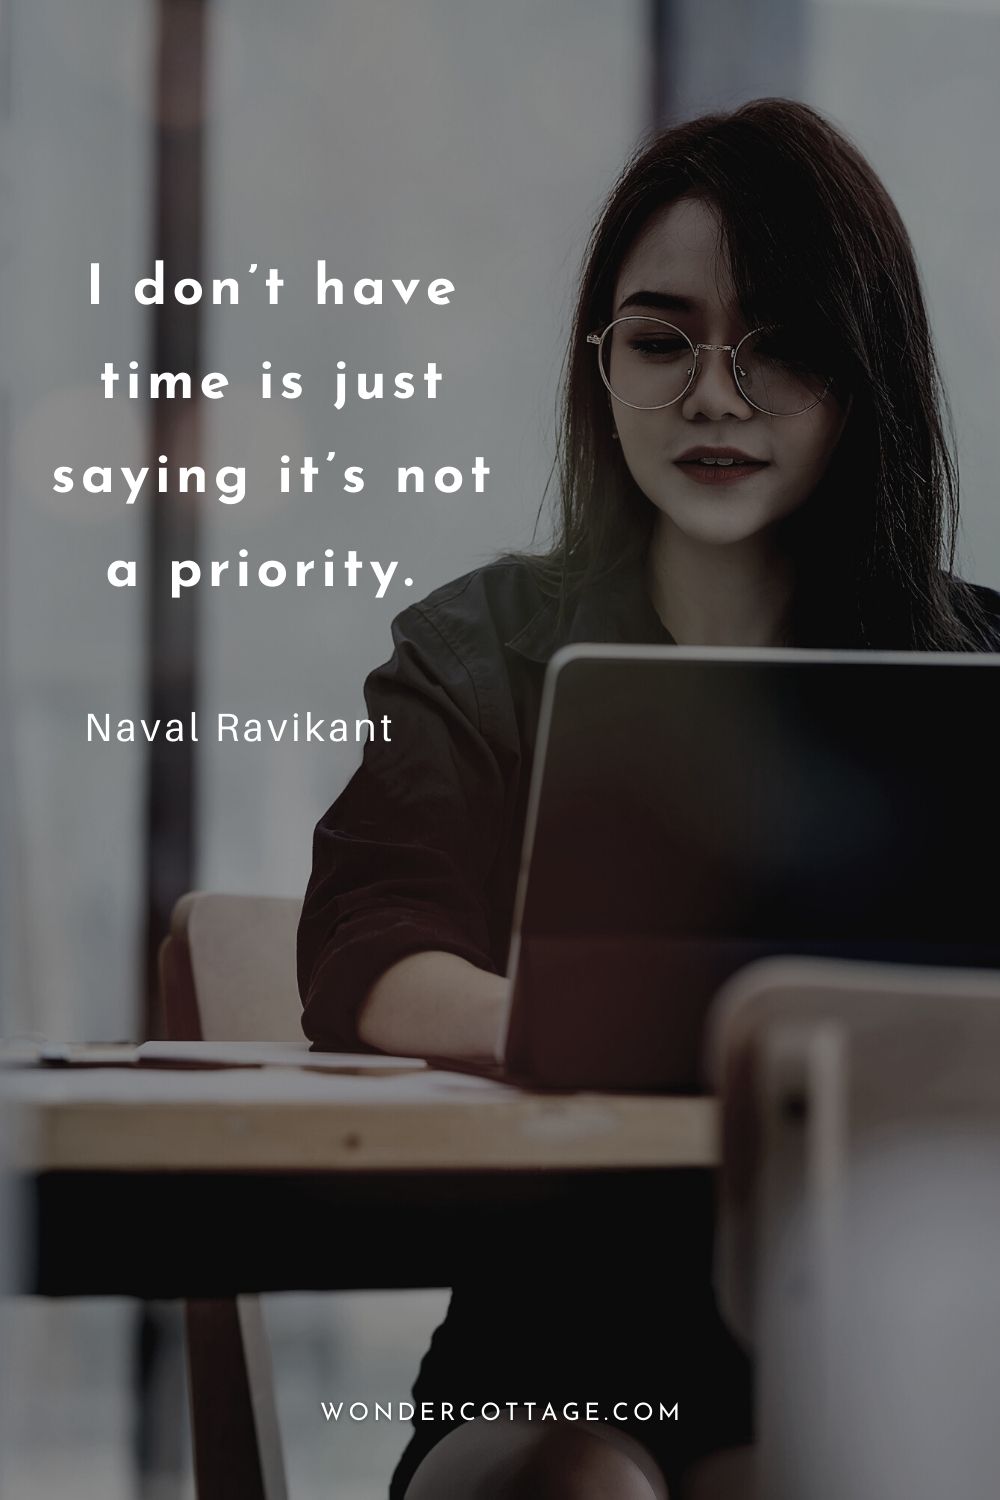 I don’t have time is just saying it’s not a priority.  Naval Ravikant